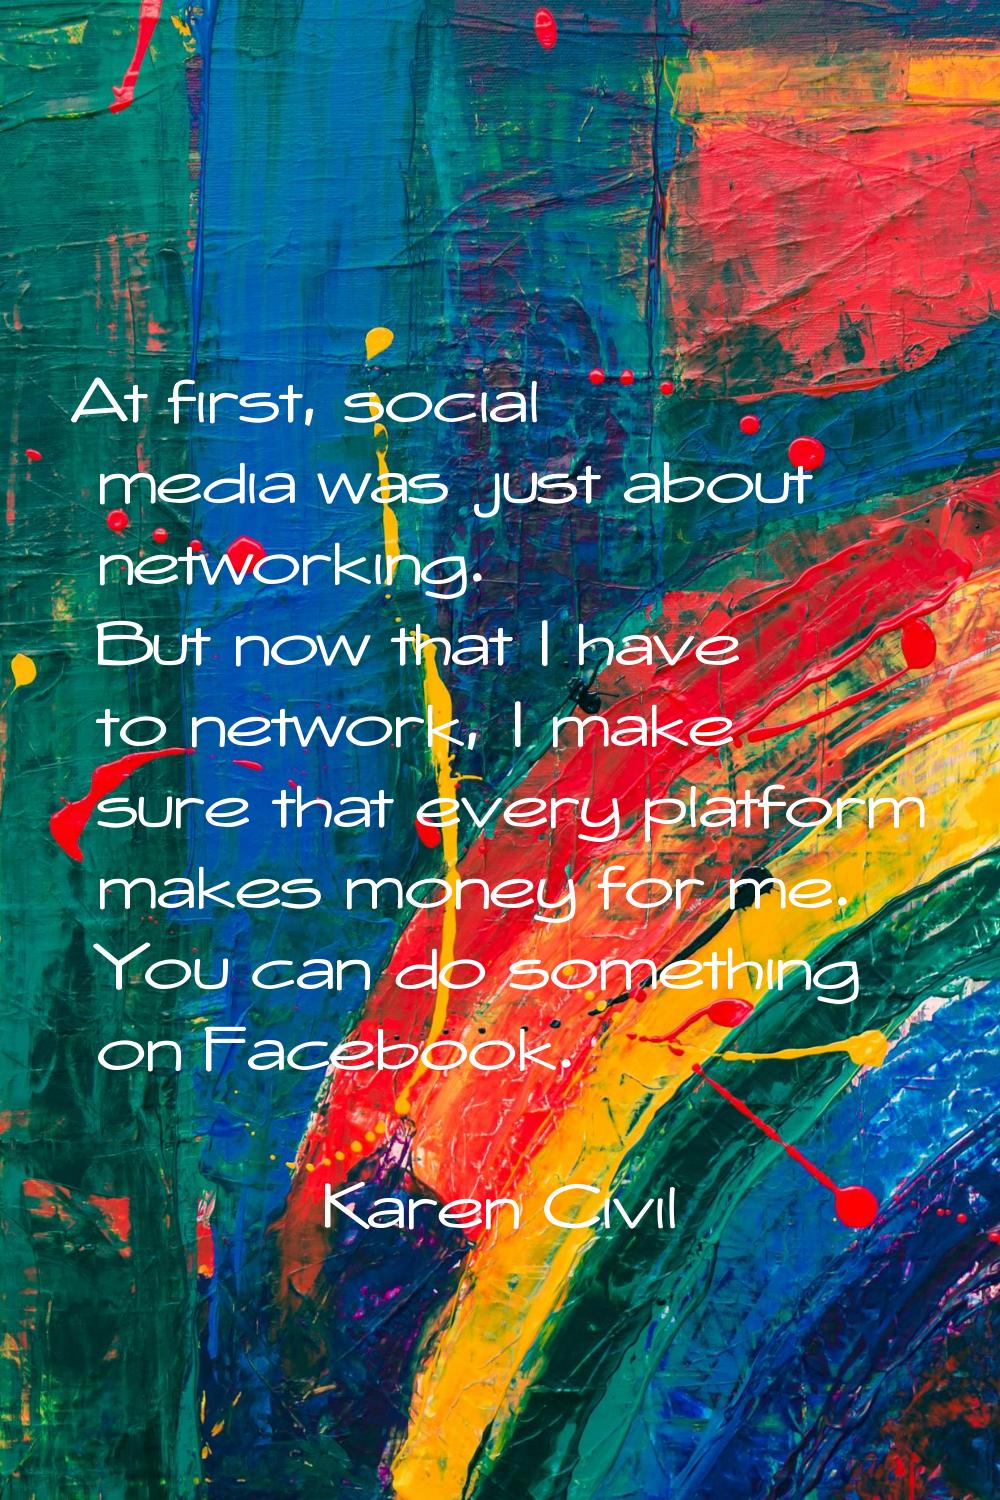 At first, social media was just about networking. But now that I have to network, I make sure that 